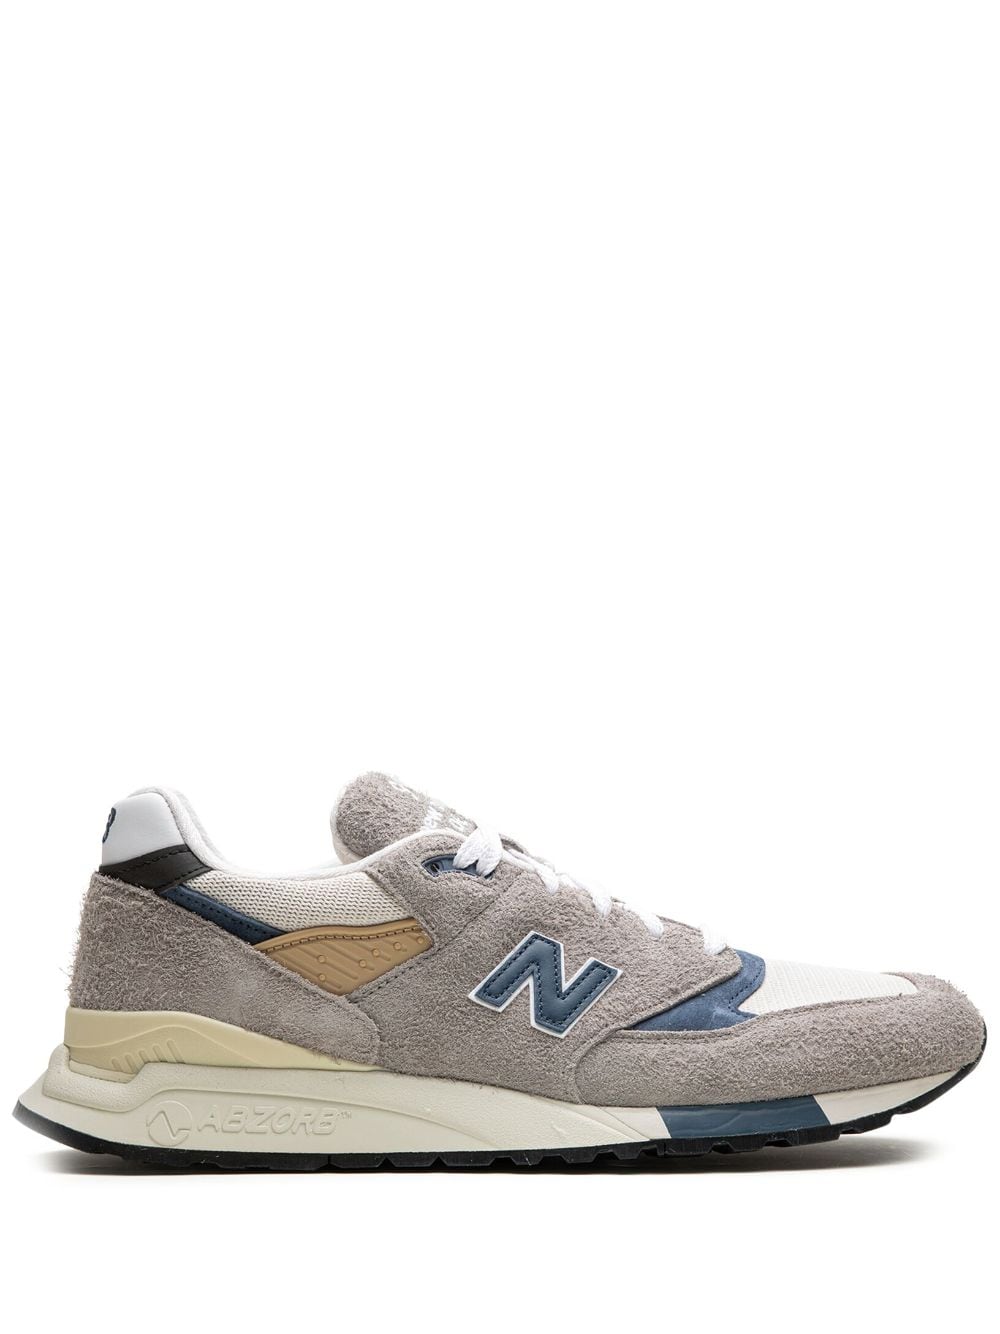 New Balance 998 Made in USA "Grey/Navy" sneakers